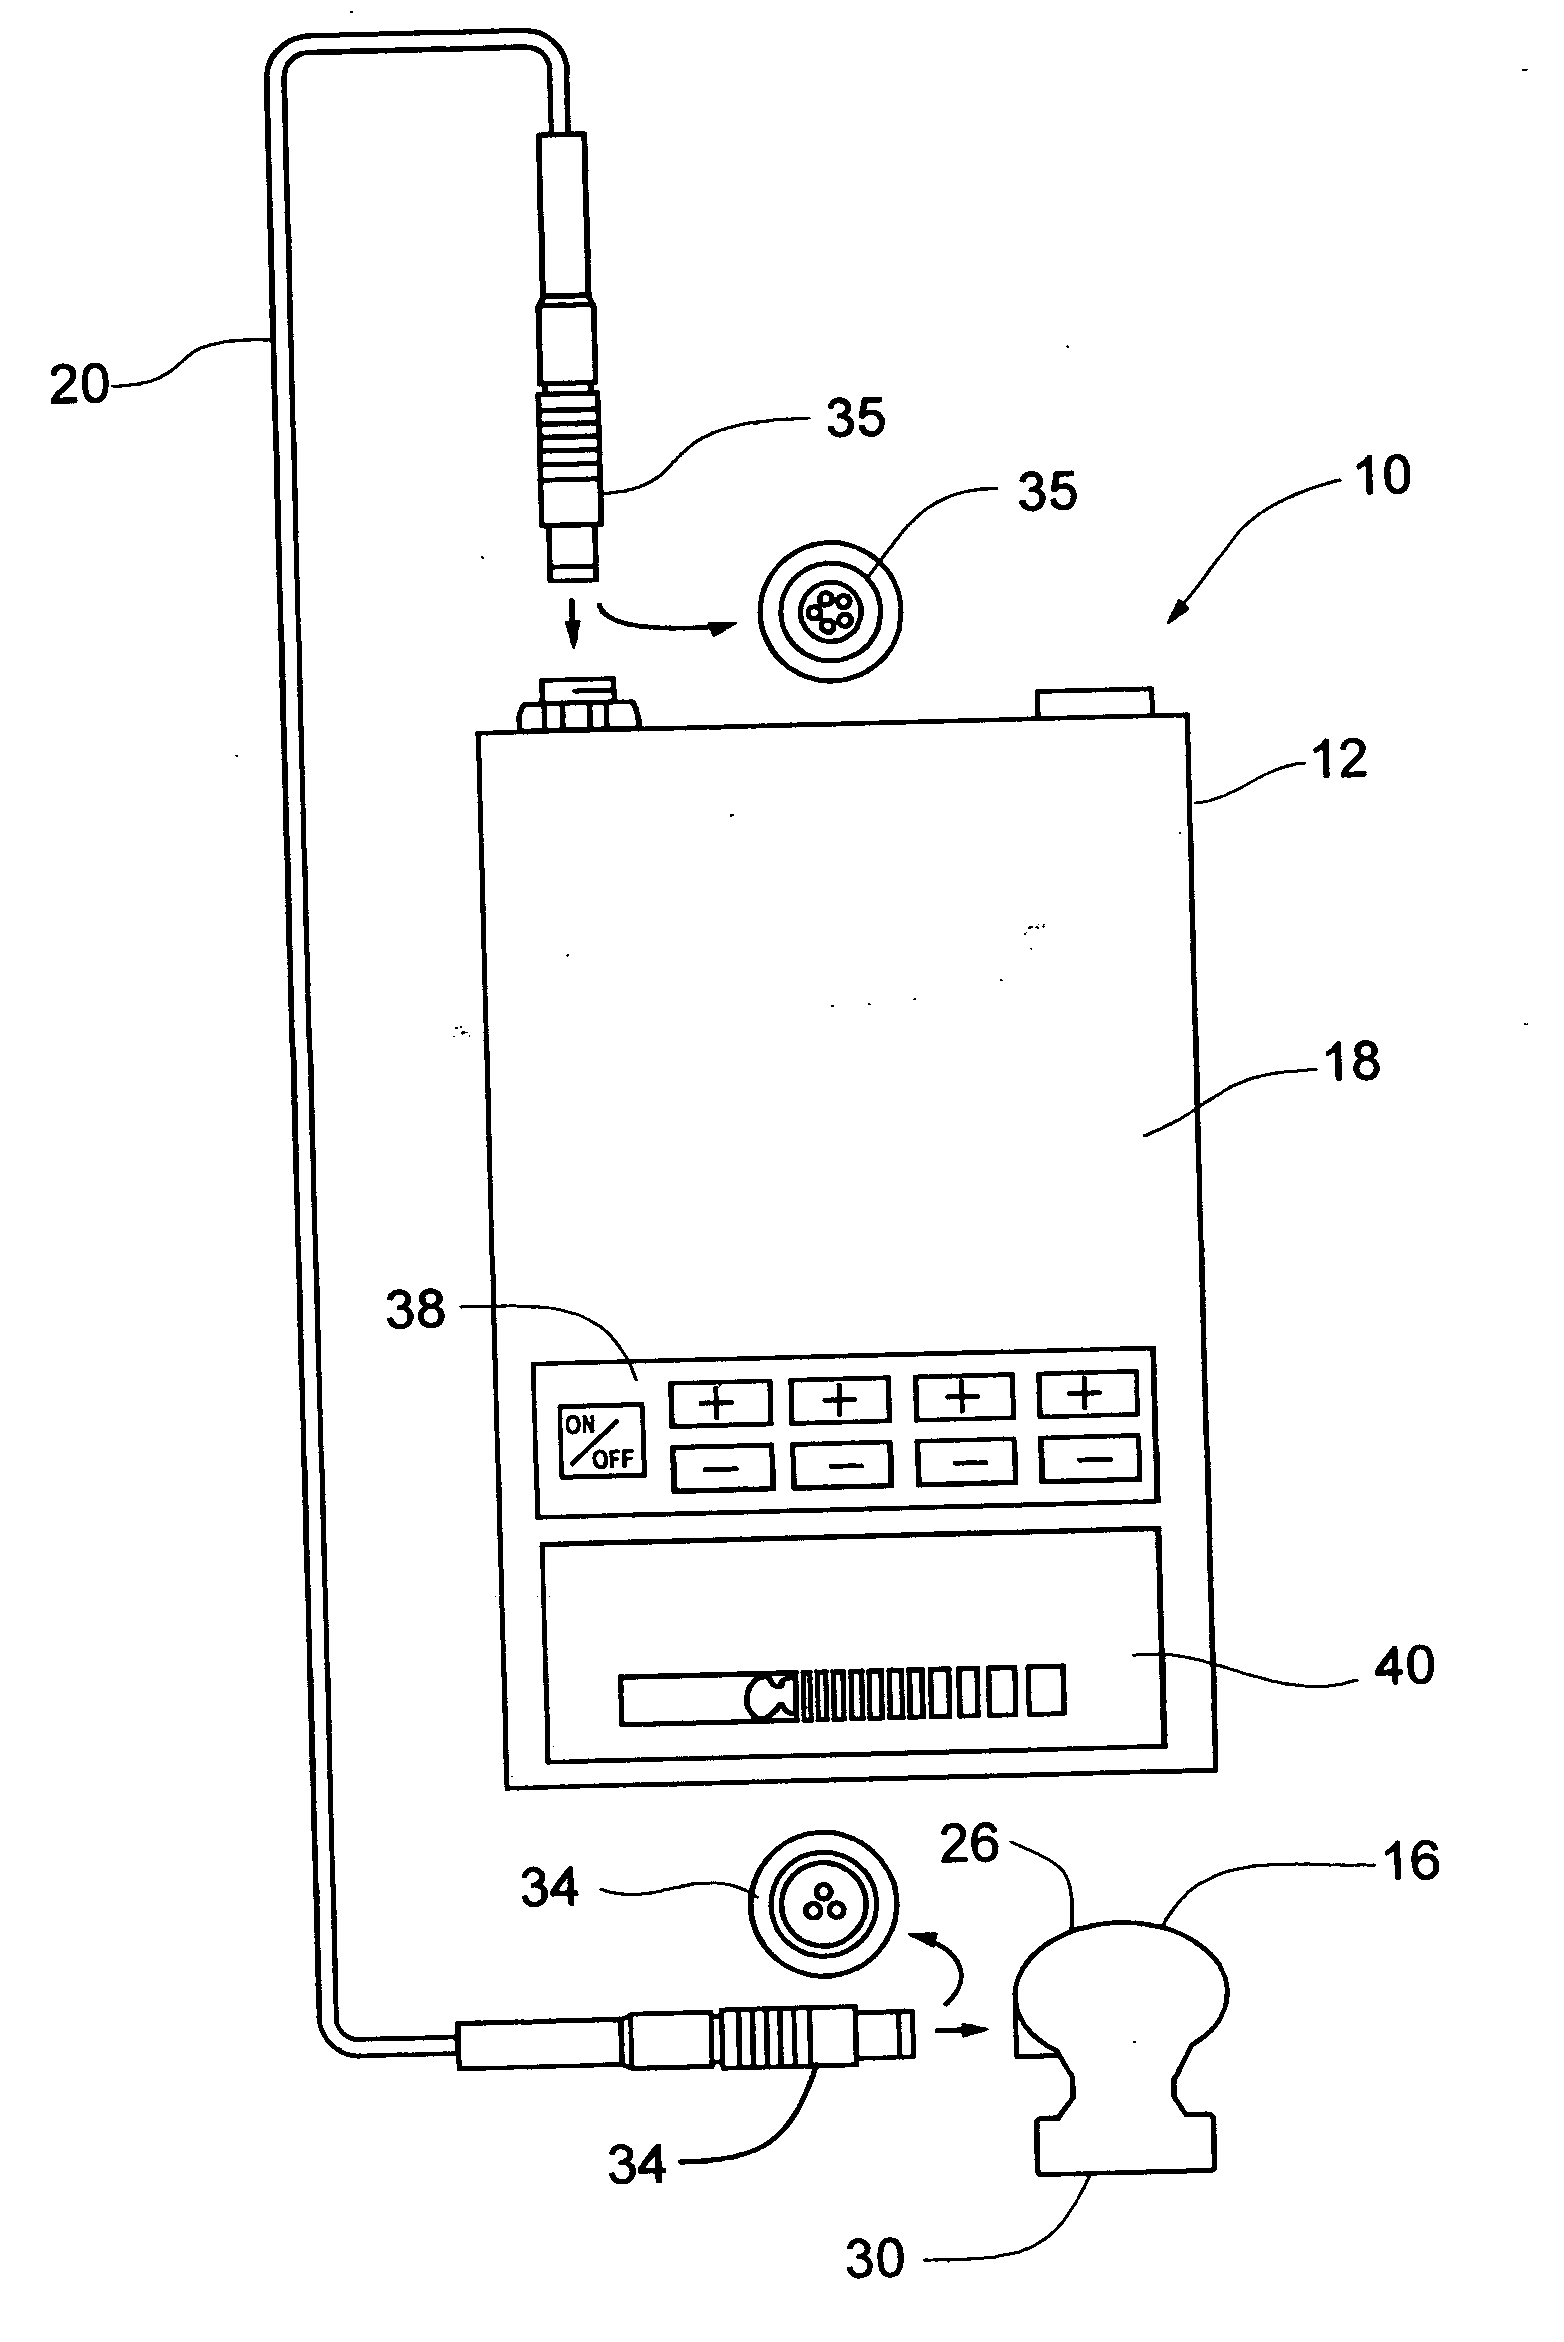 Ultrasound therapeutic device